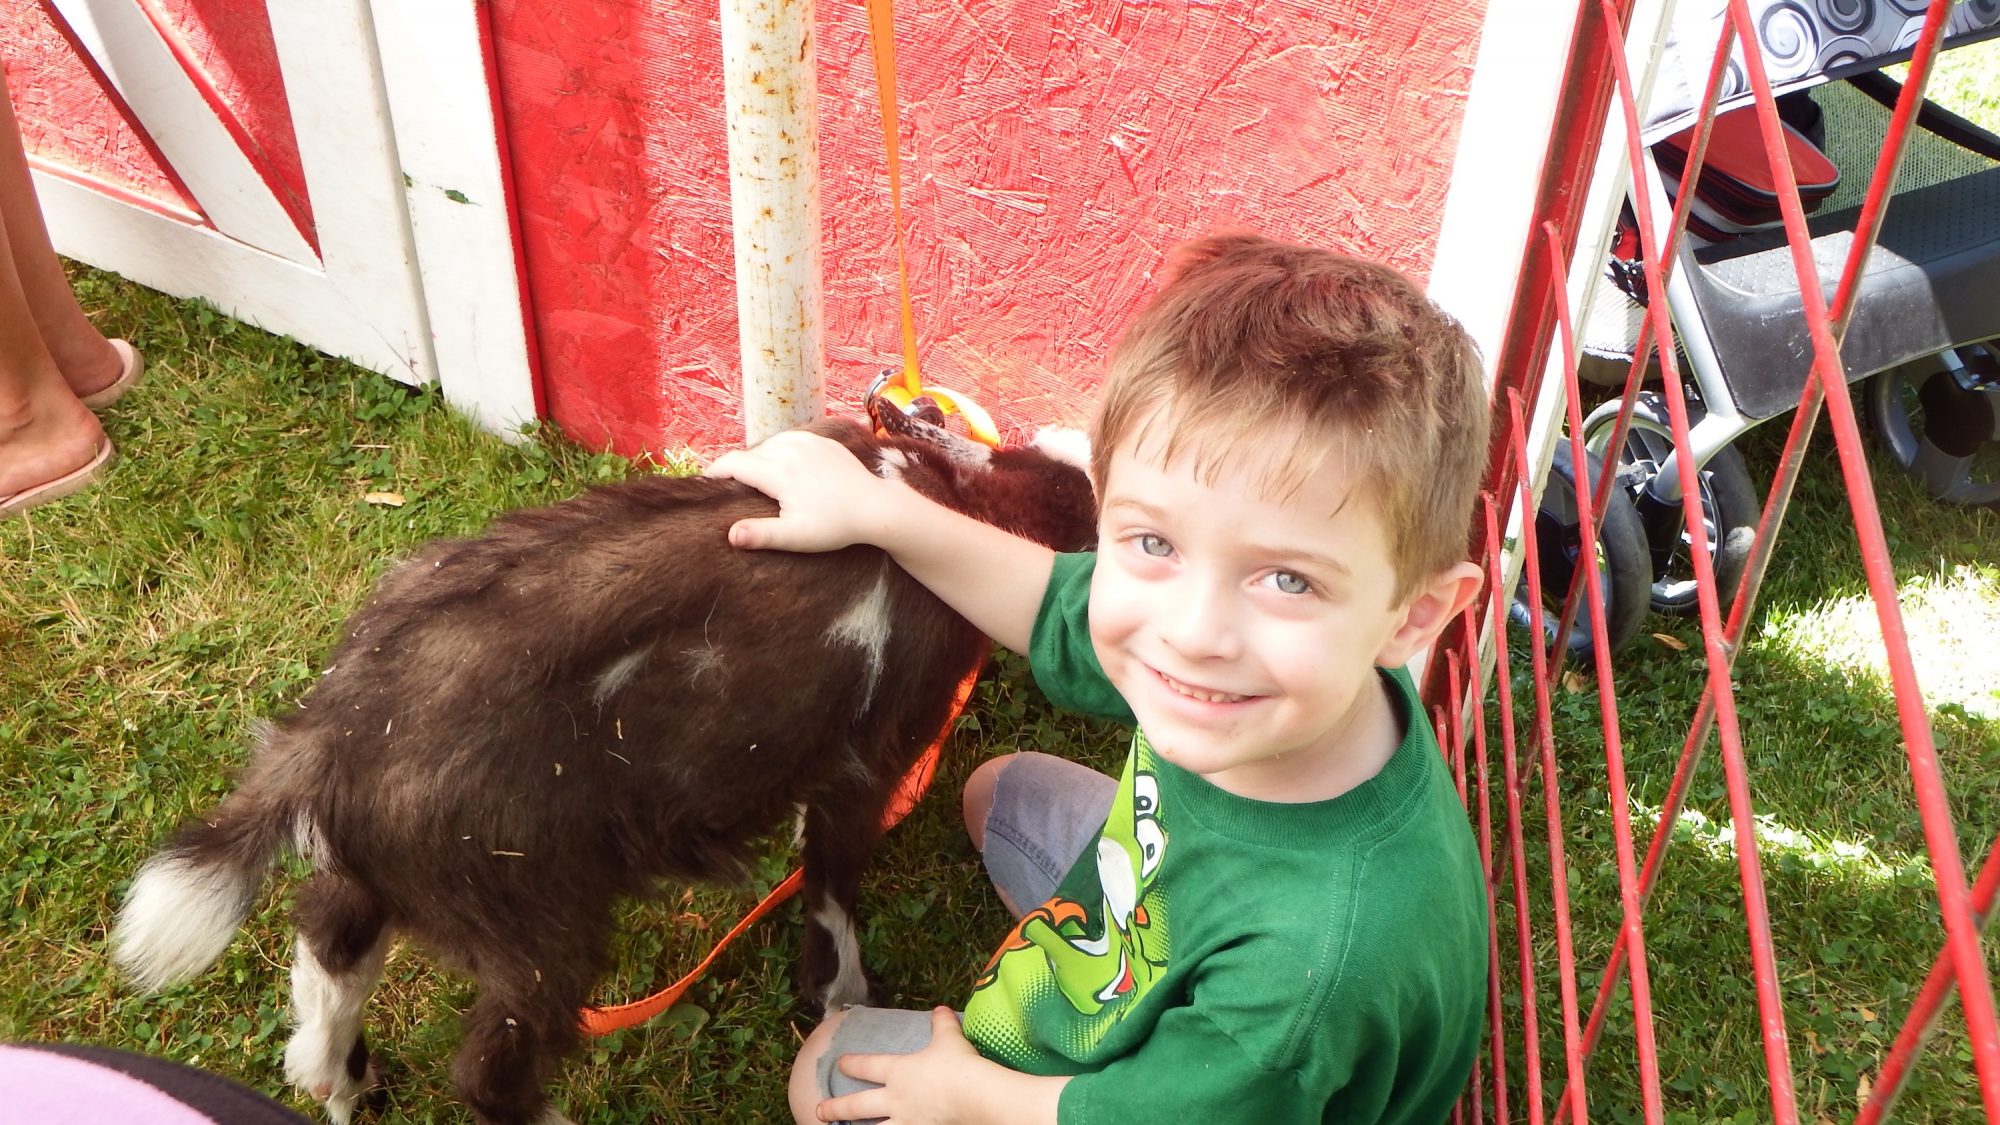 A young boy petting a goat.